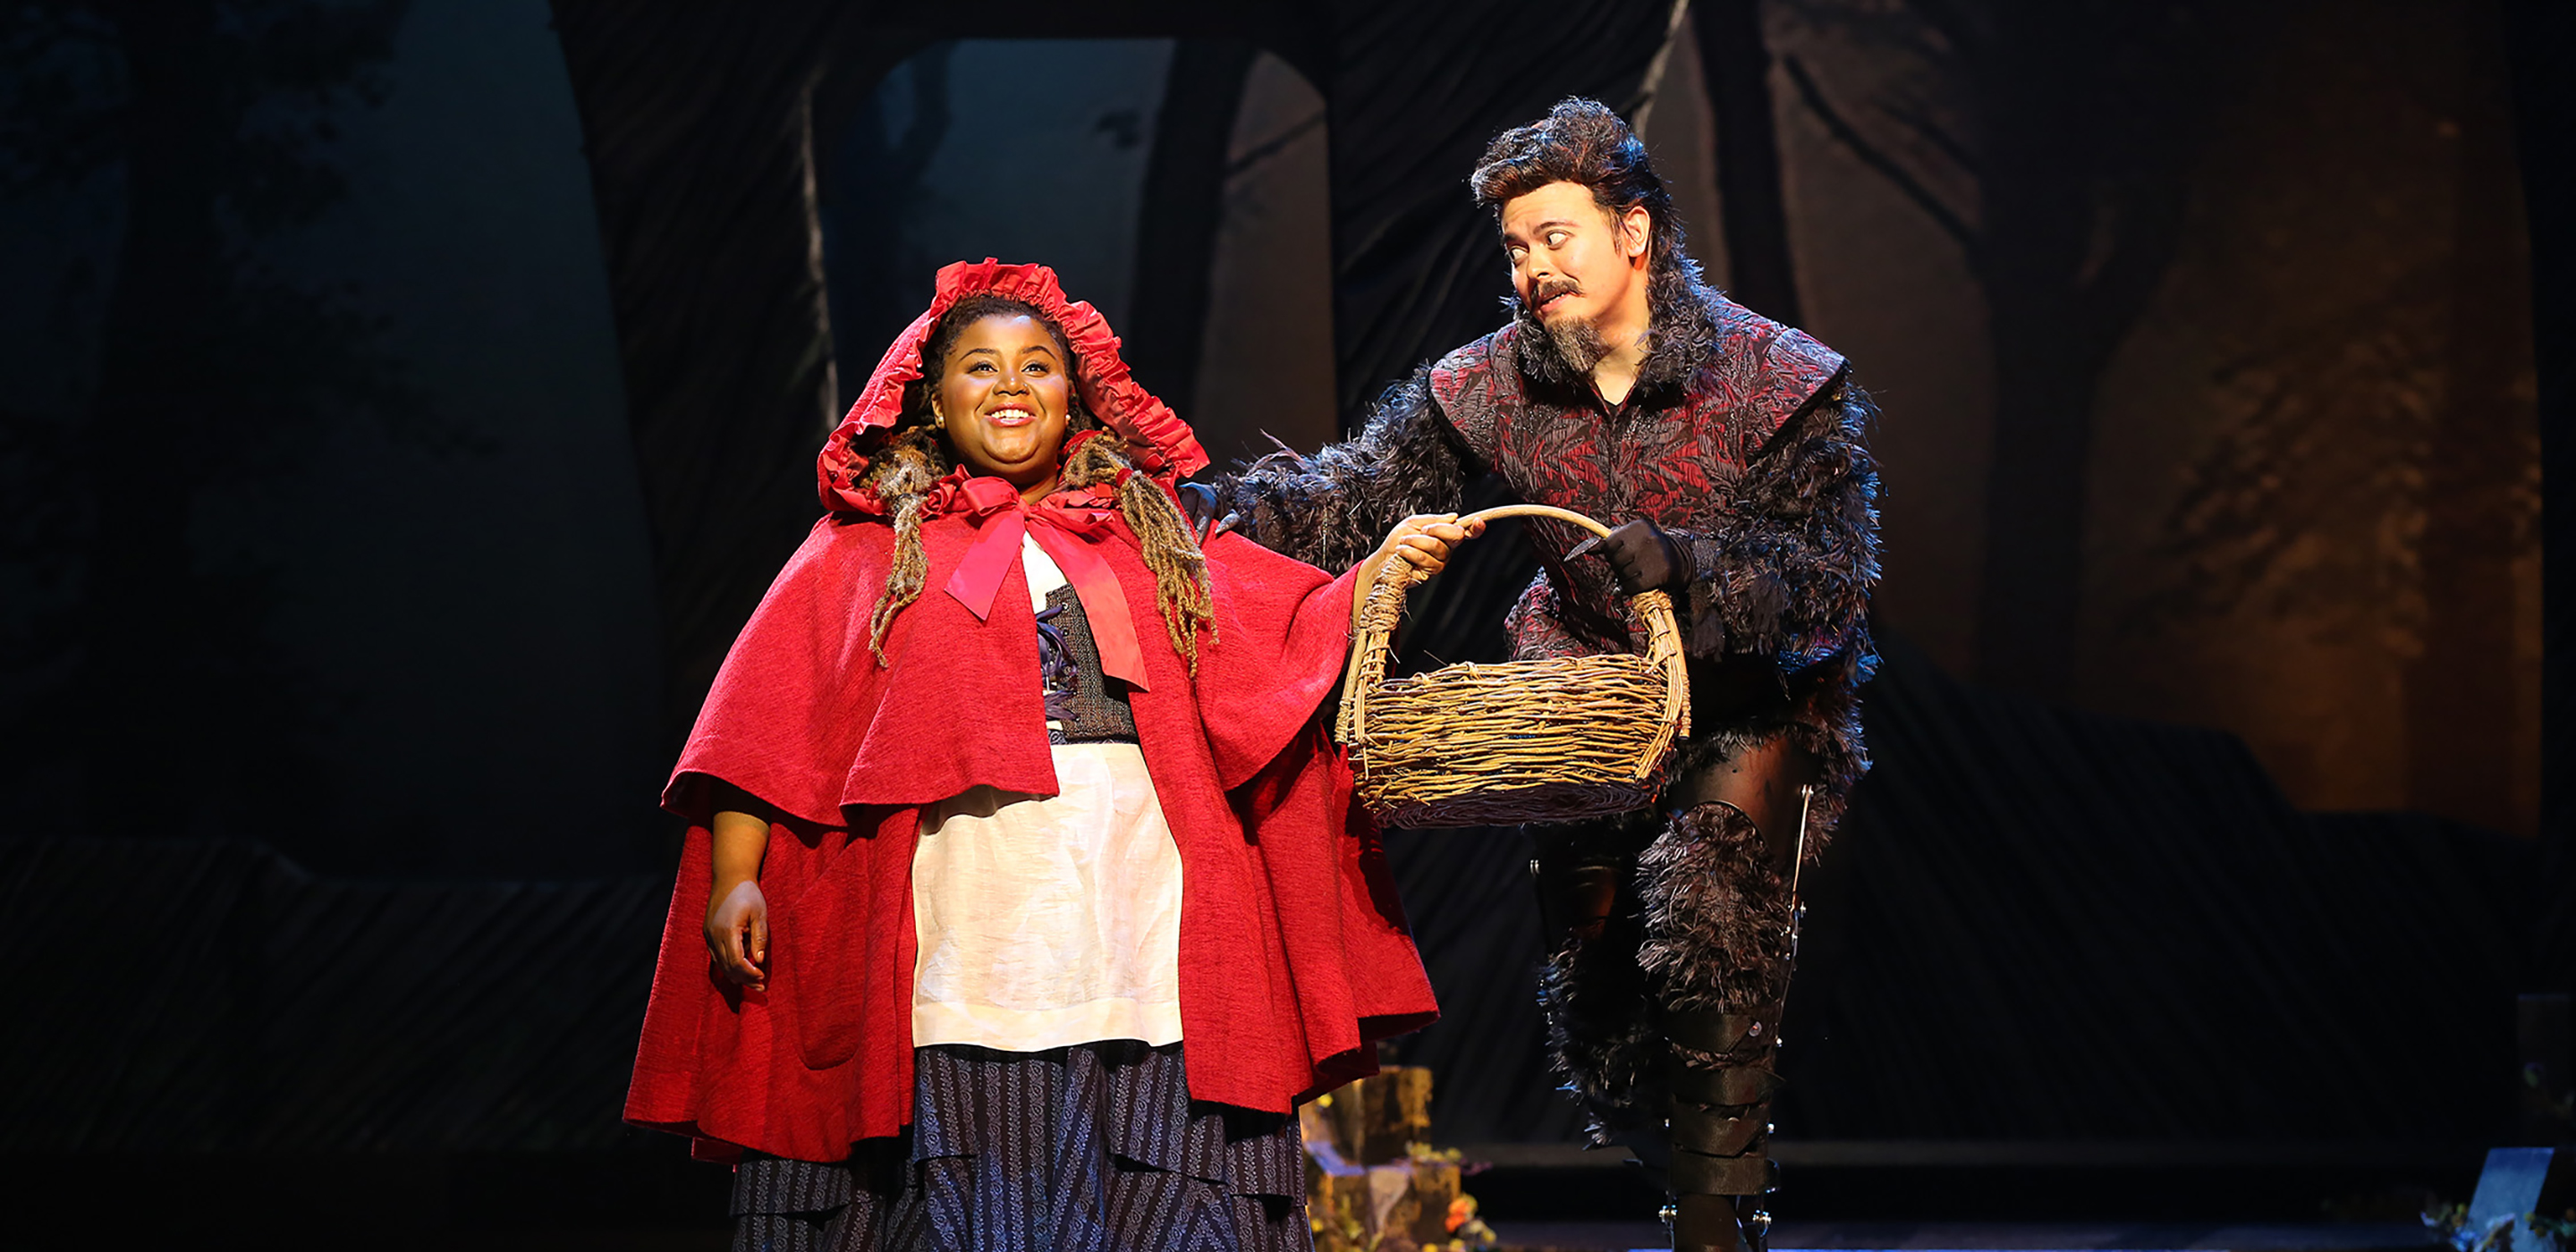 Little Red Ridinghood stands carrying a large wicker basket. On the right is an actor dressed as a wolf with one hand on her shoulder. His costume includes black stilts on his legs